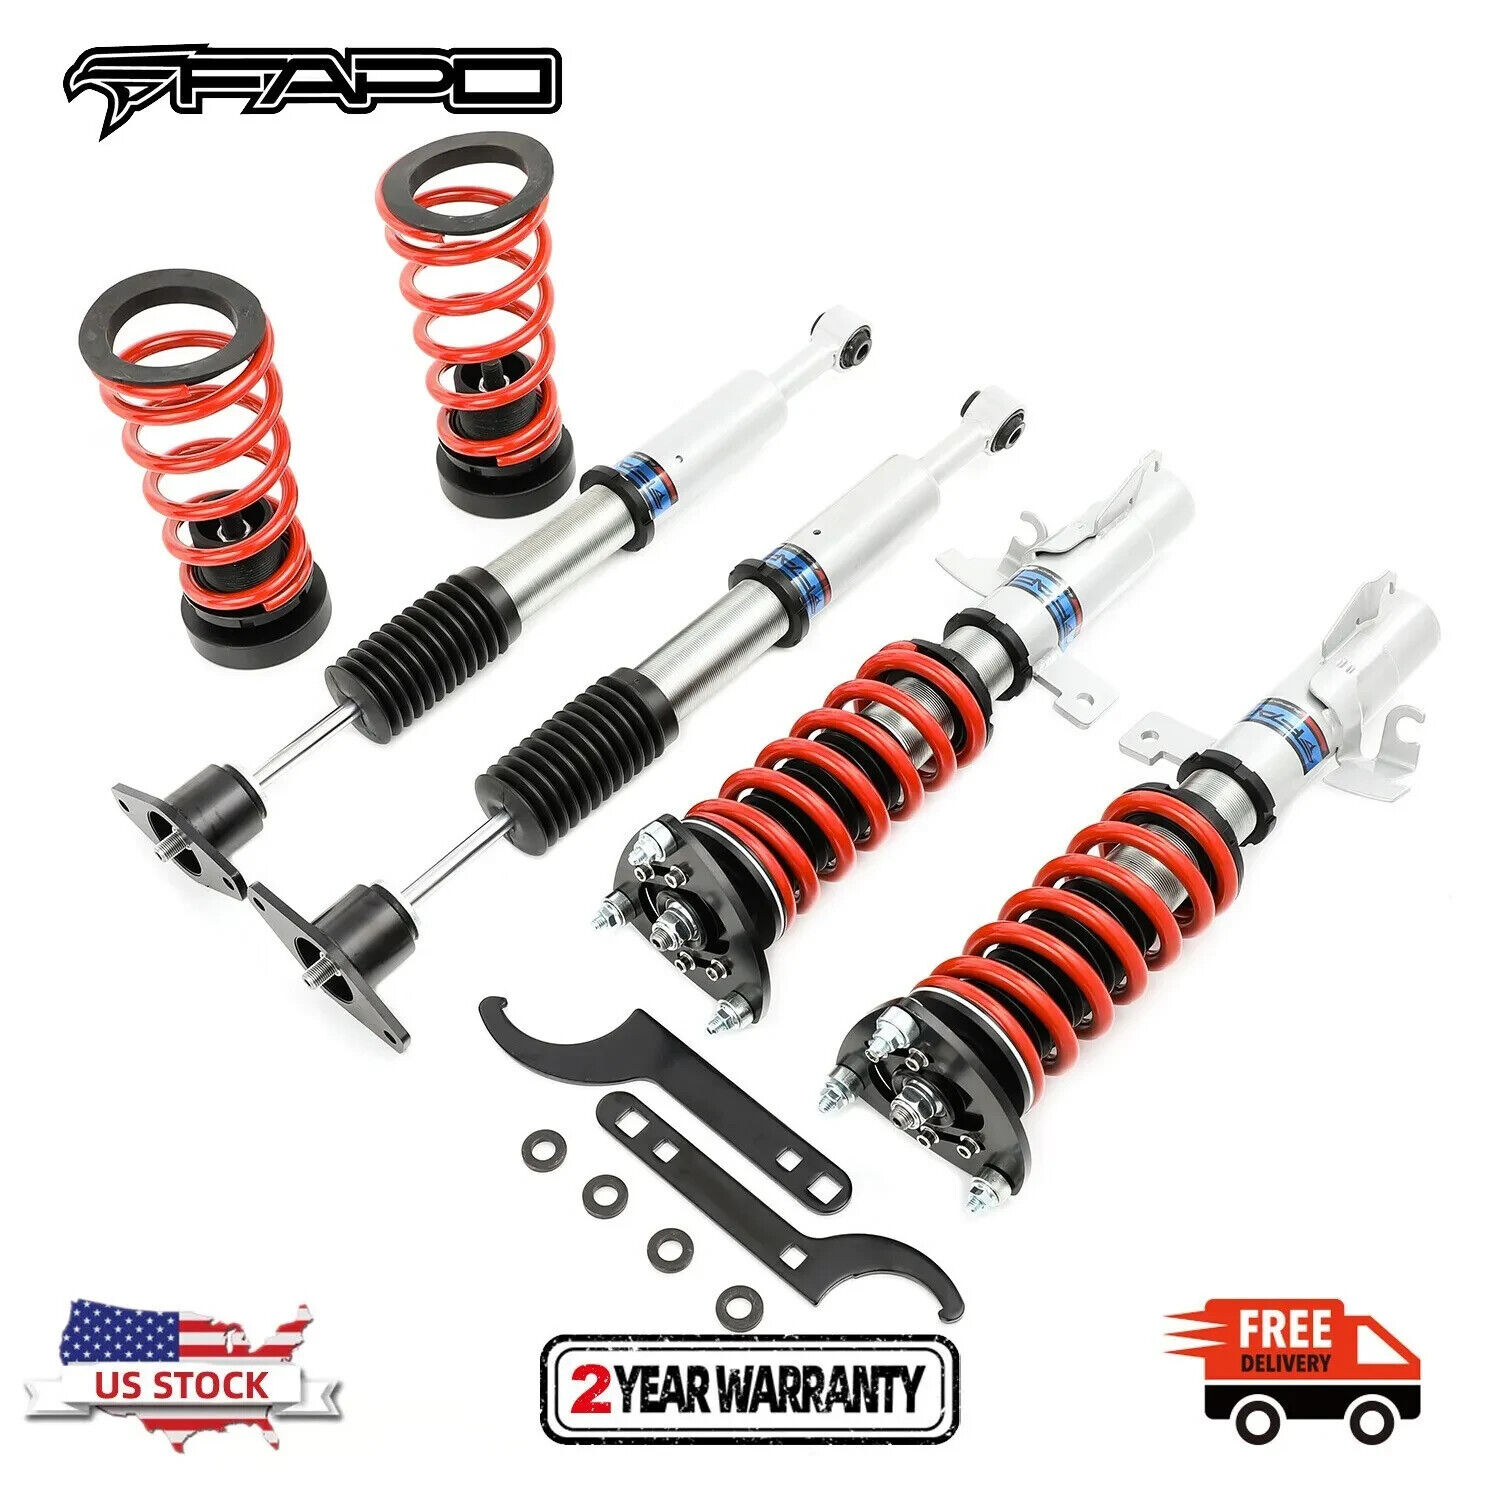 FAPO Coilovers Kits for Mazda 3 03-13/Ford Focus 05-14 Adjustable Height